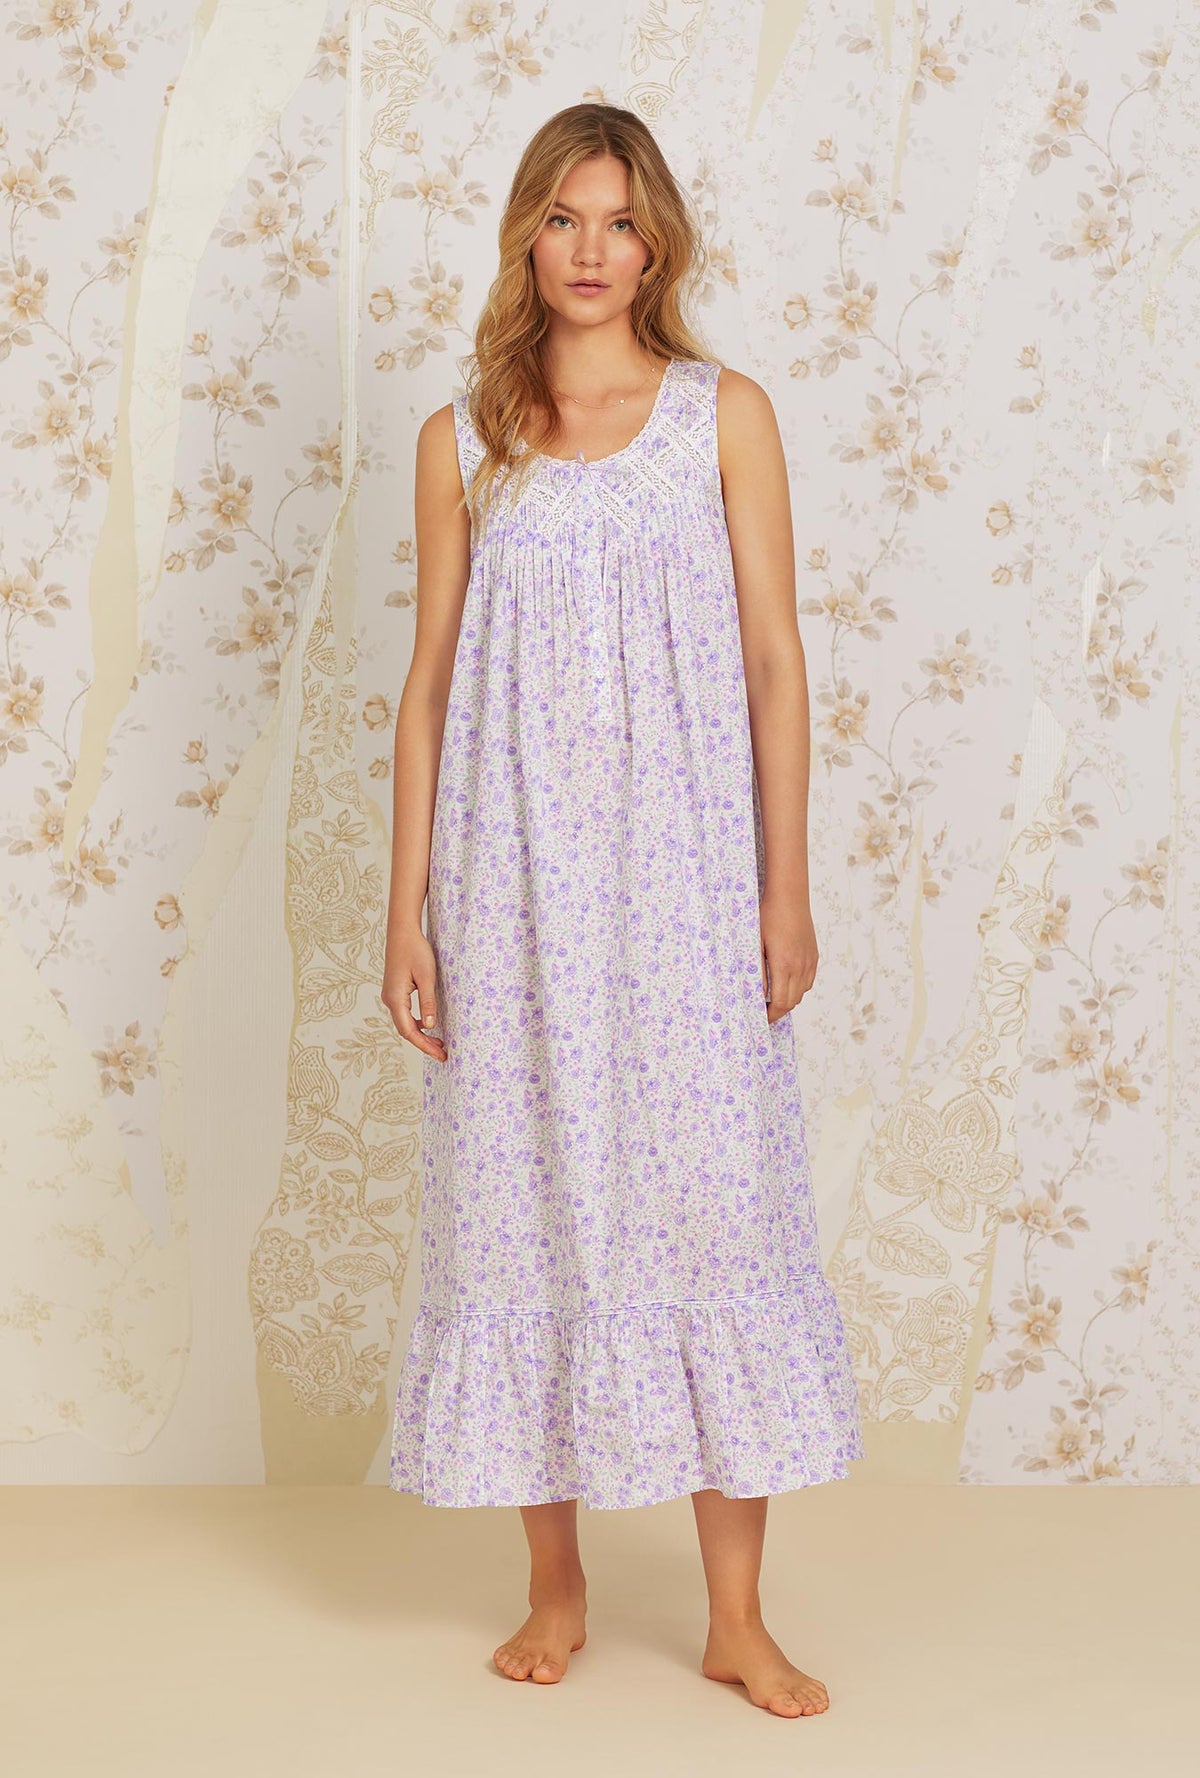 A lady wearing white sleeveless Cotton Nightgown with  Heather Fields print